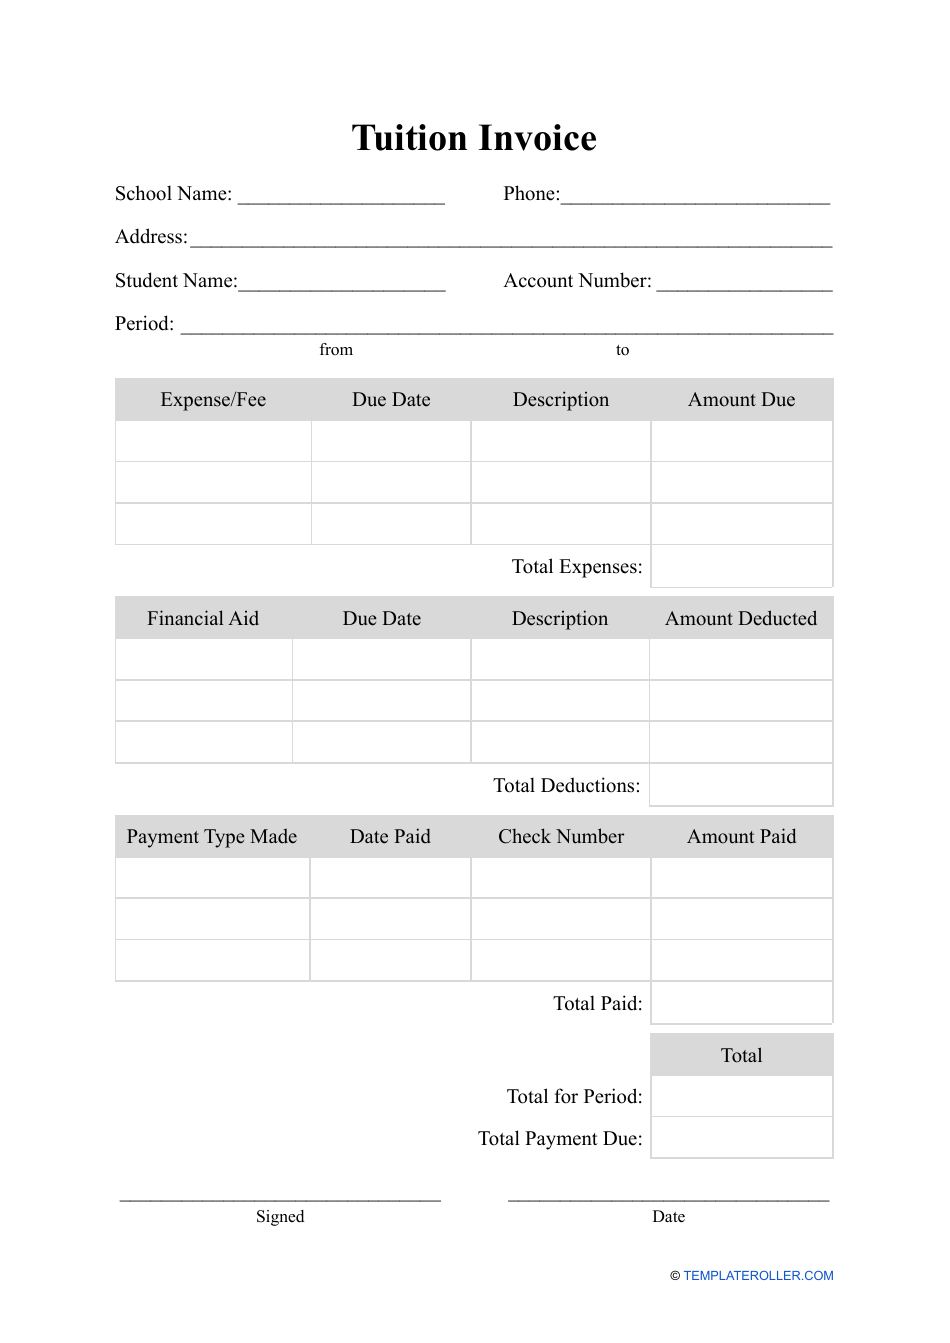 tuition-bill-template